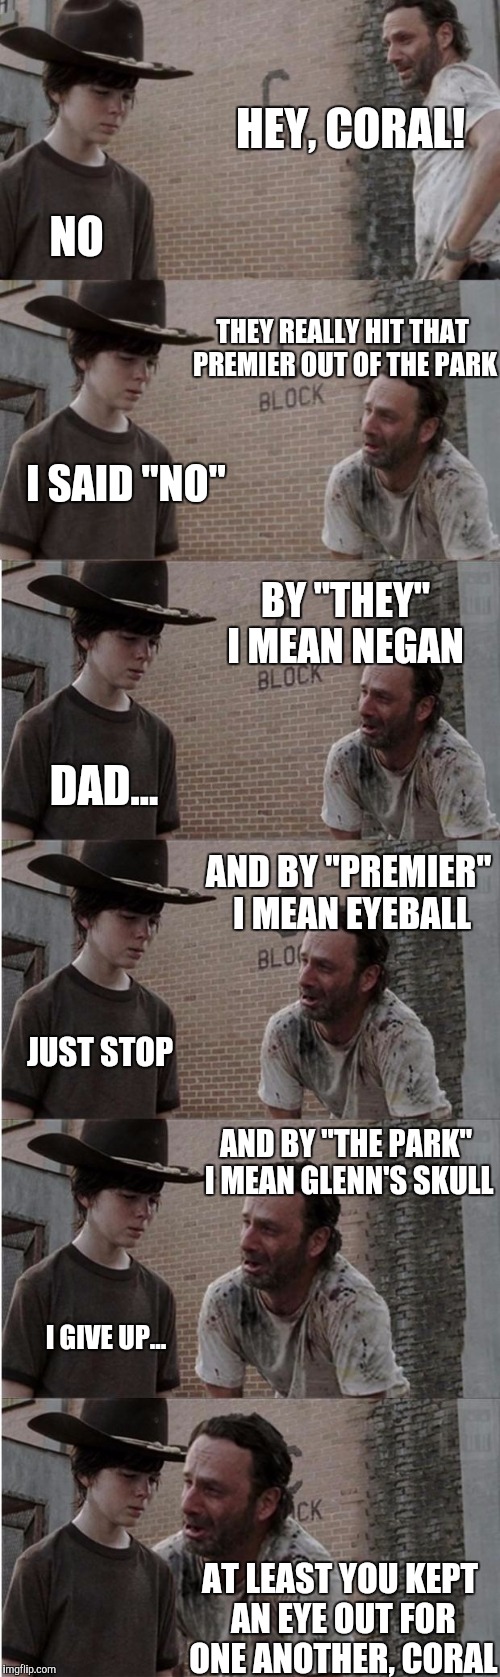 Out of the park | HEY, CORAL! NO; THEY REALLY HIT THAT PREMIER OUT OF THE PARK; I SAID "NO"; BY "THEY" I MEAN NEGAN; DAD... AND BY "PREMIER" I MEAN EYEBALL; JUST STOP; AND BY "THE PARK" I MEAN GLENN'S SKULL; I GIVE UP... AT LEAST YOU KEPT AN EYE OUT FOR ONE ANOTHER, CORAL | image tagged in memes,rick and carl longer | made w/ Imgflip meme maker